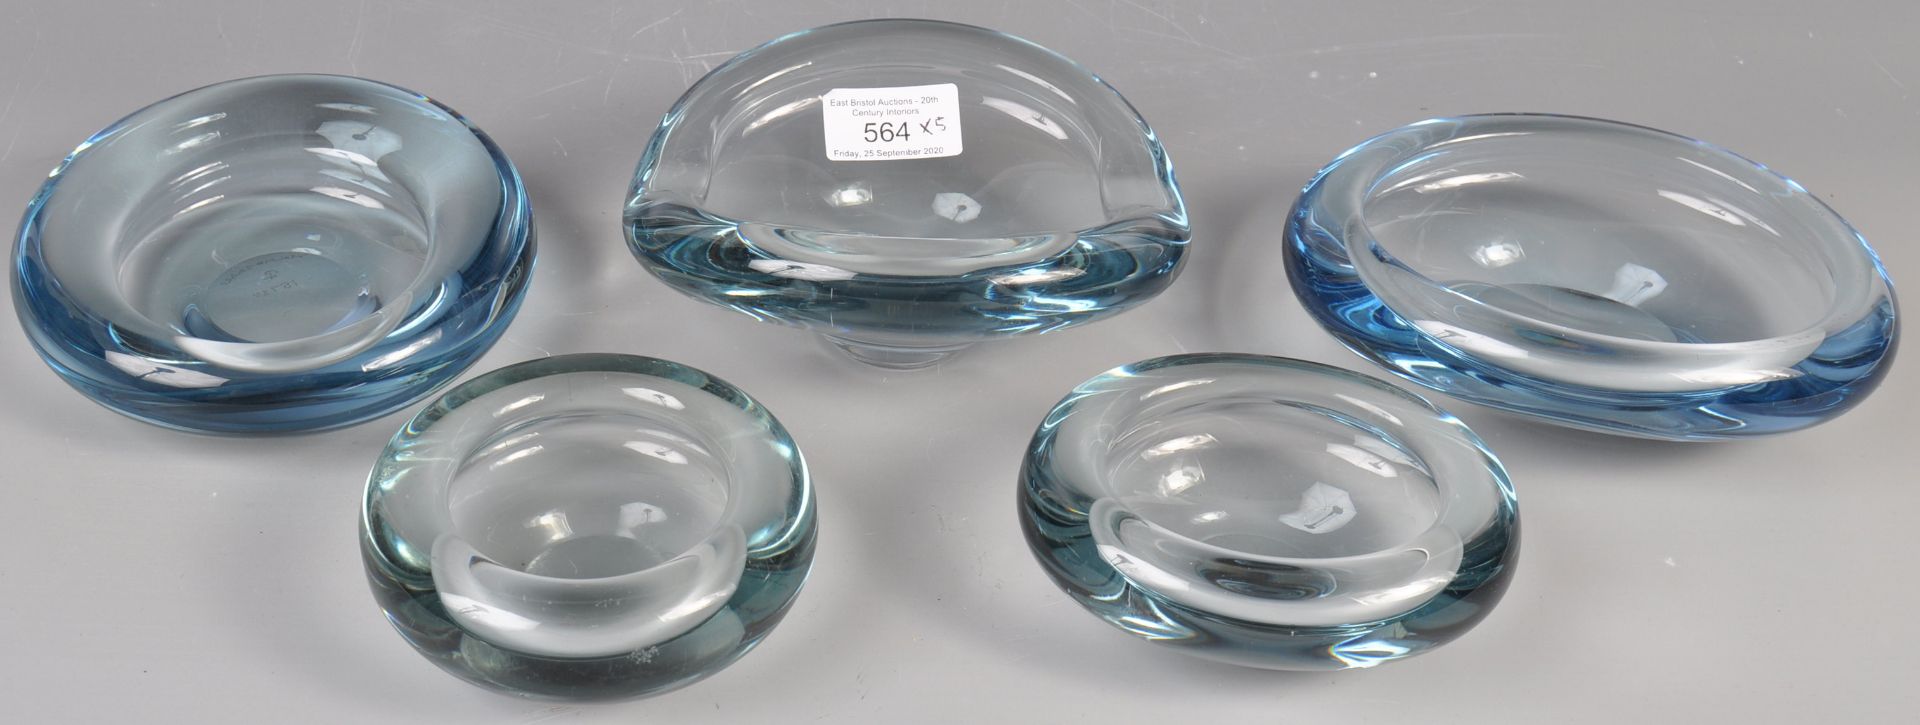 COLLECTION OF DANISH GLASS HOLMEGAARD BOWLS BY P. LUTKEN - Image 2 of 8